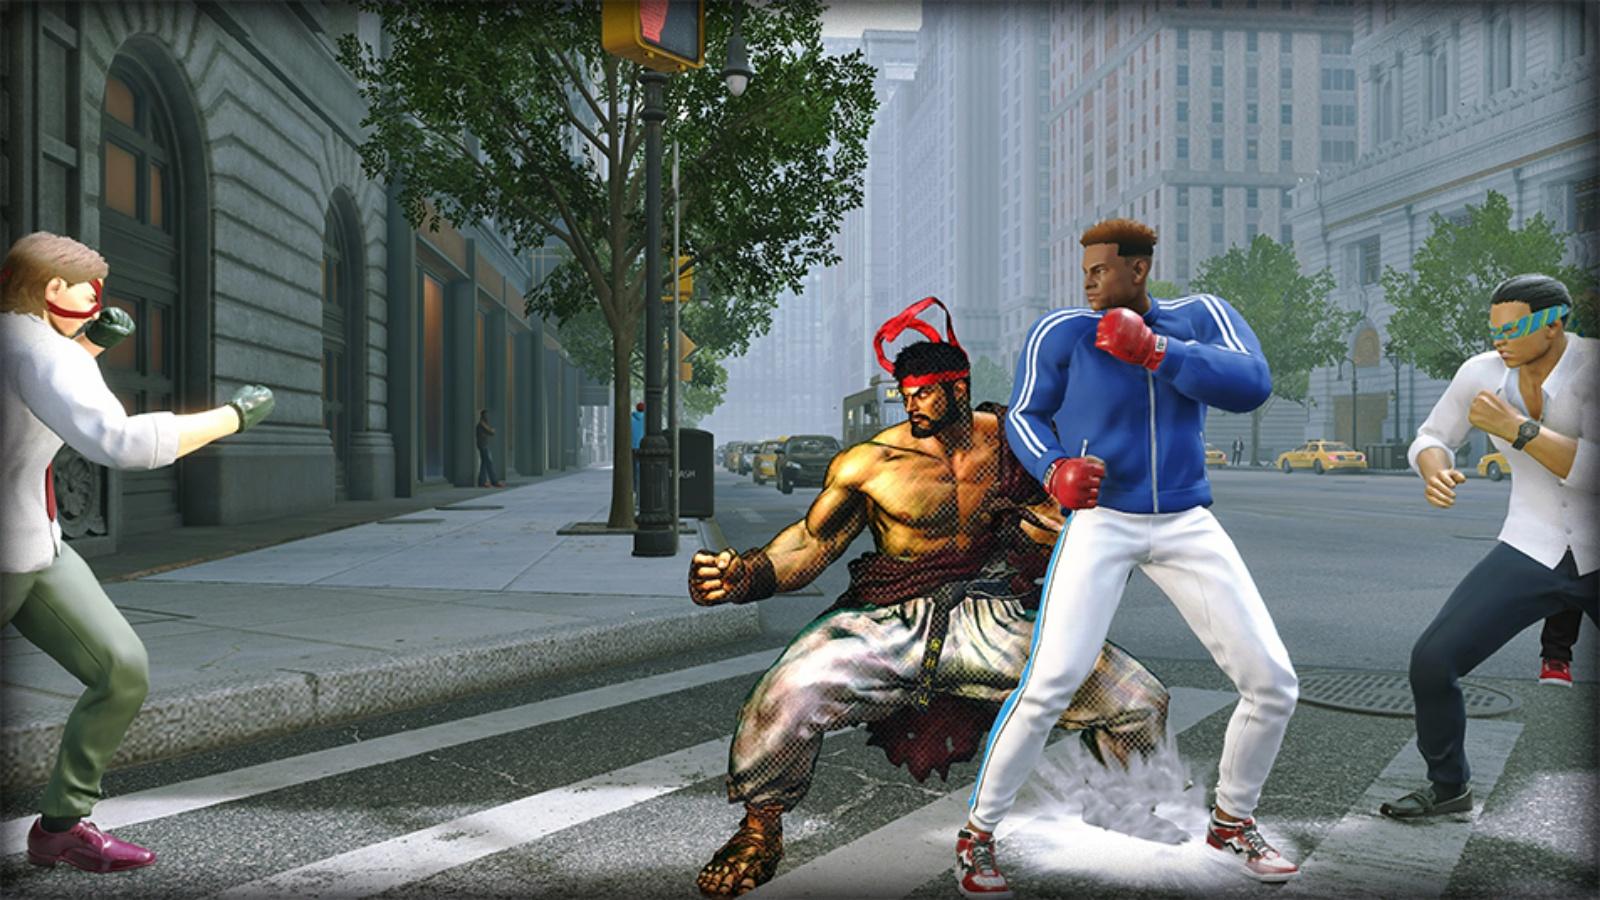 Street Fighter™ 6 Ultimate Edition